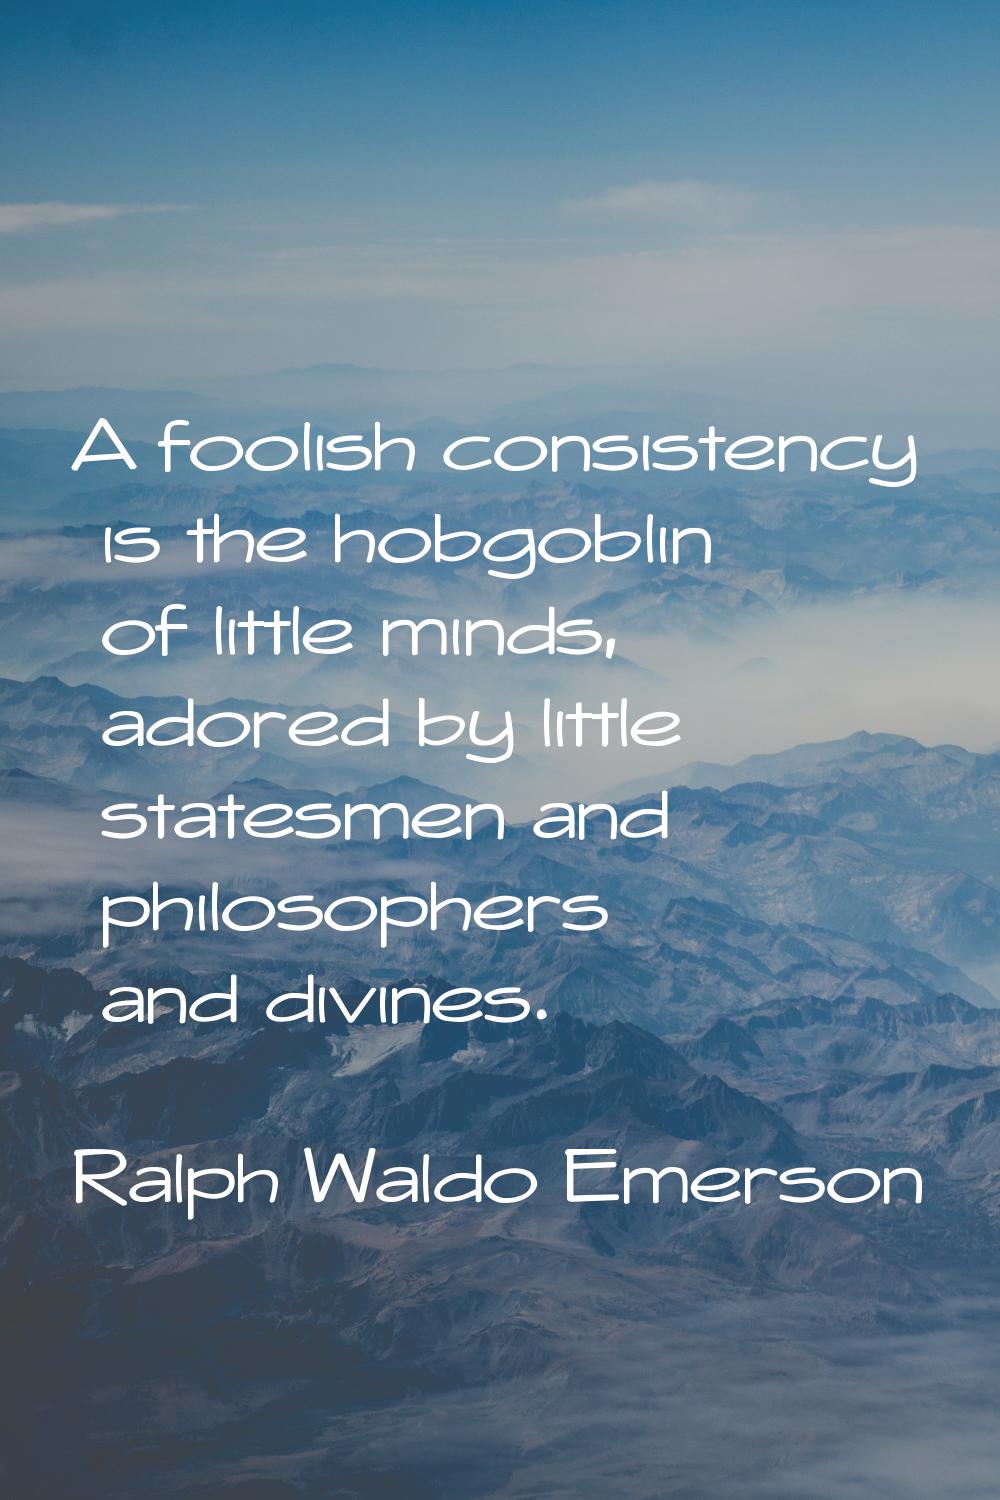 A foolish consistency is the hobgoblin of little minds, adored by little statesmen and philosophers